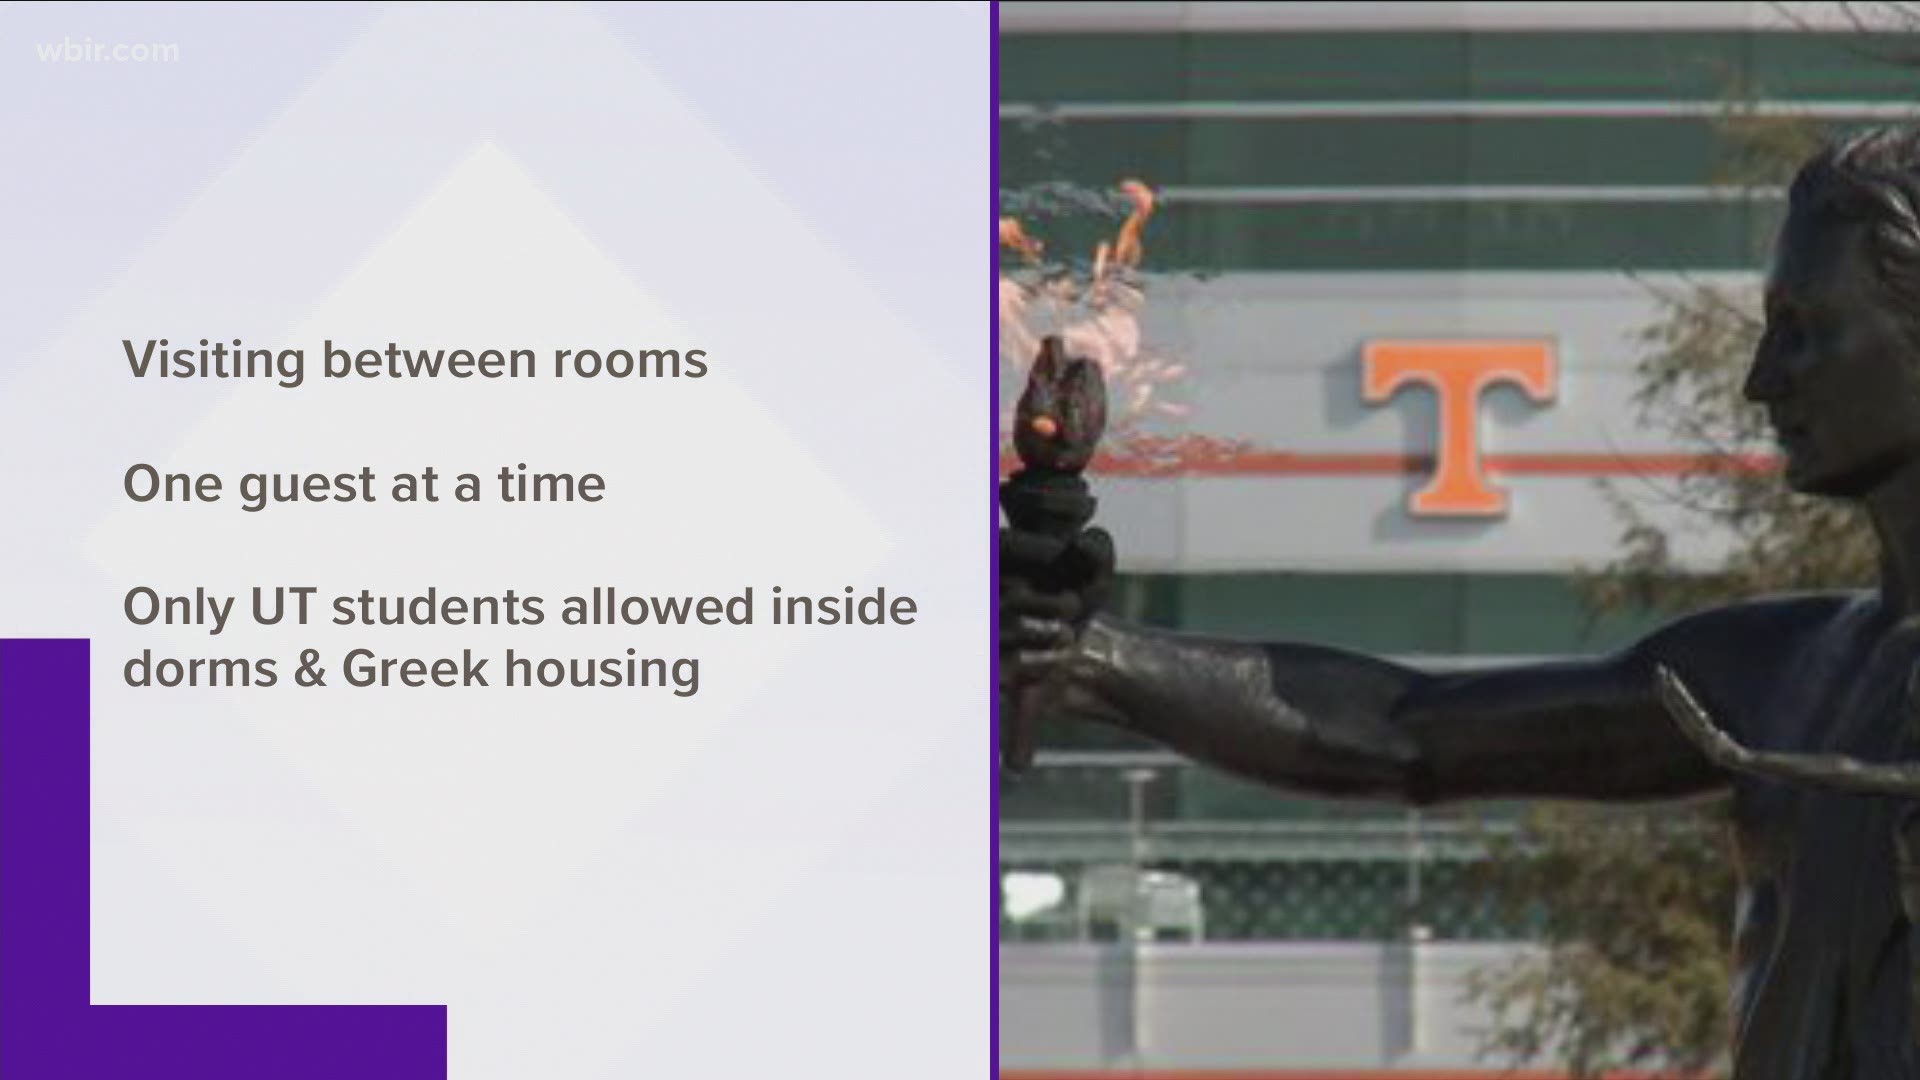 Students in campus housing can now resume visiting between rooms, but only one guest is allowed at a time and only UT students are allowed in campus housing.